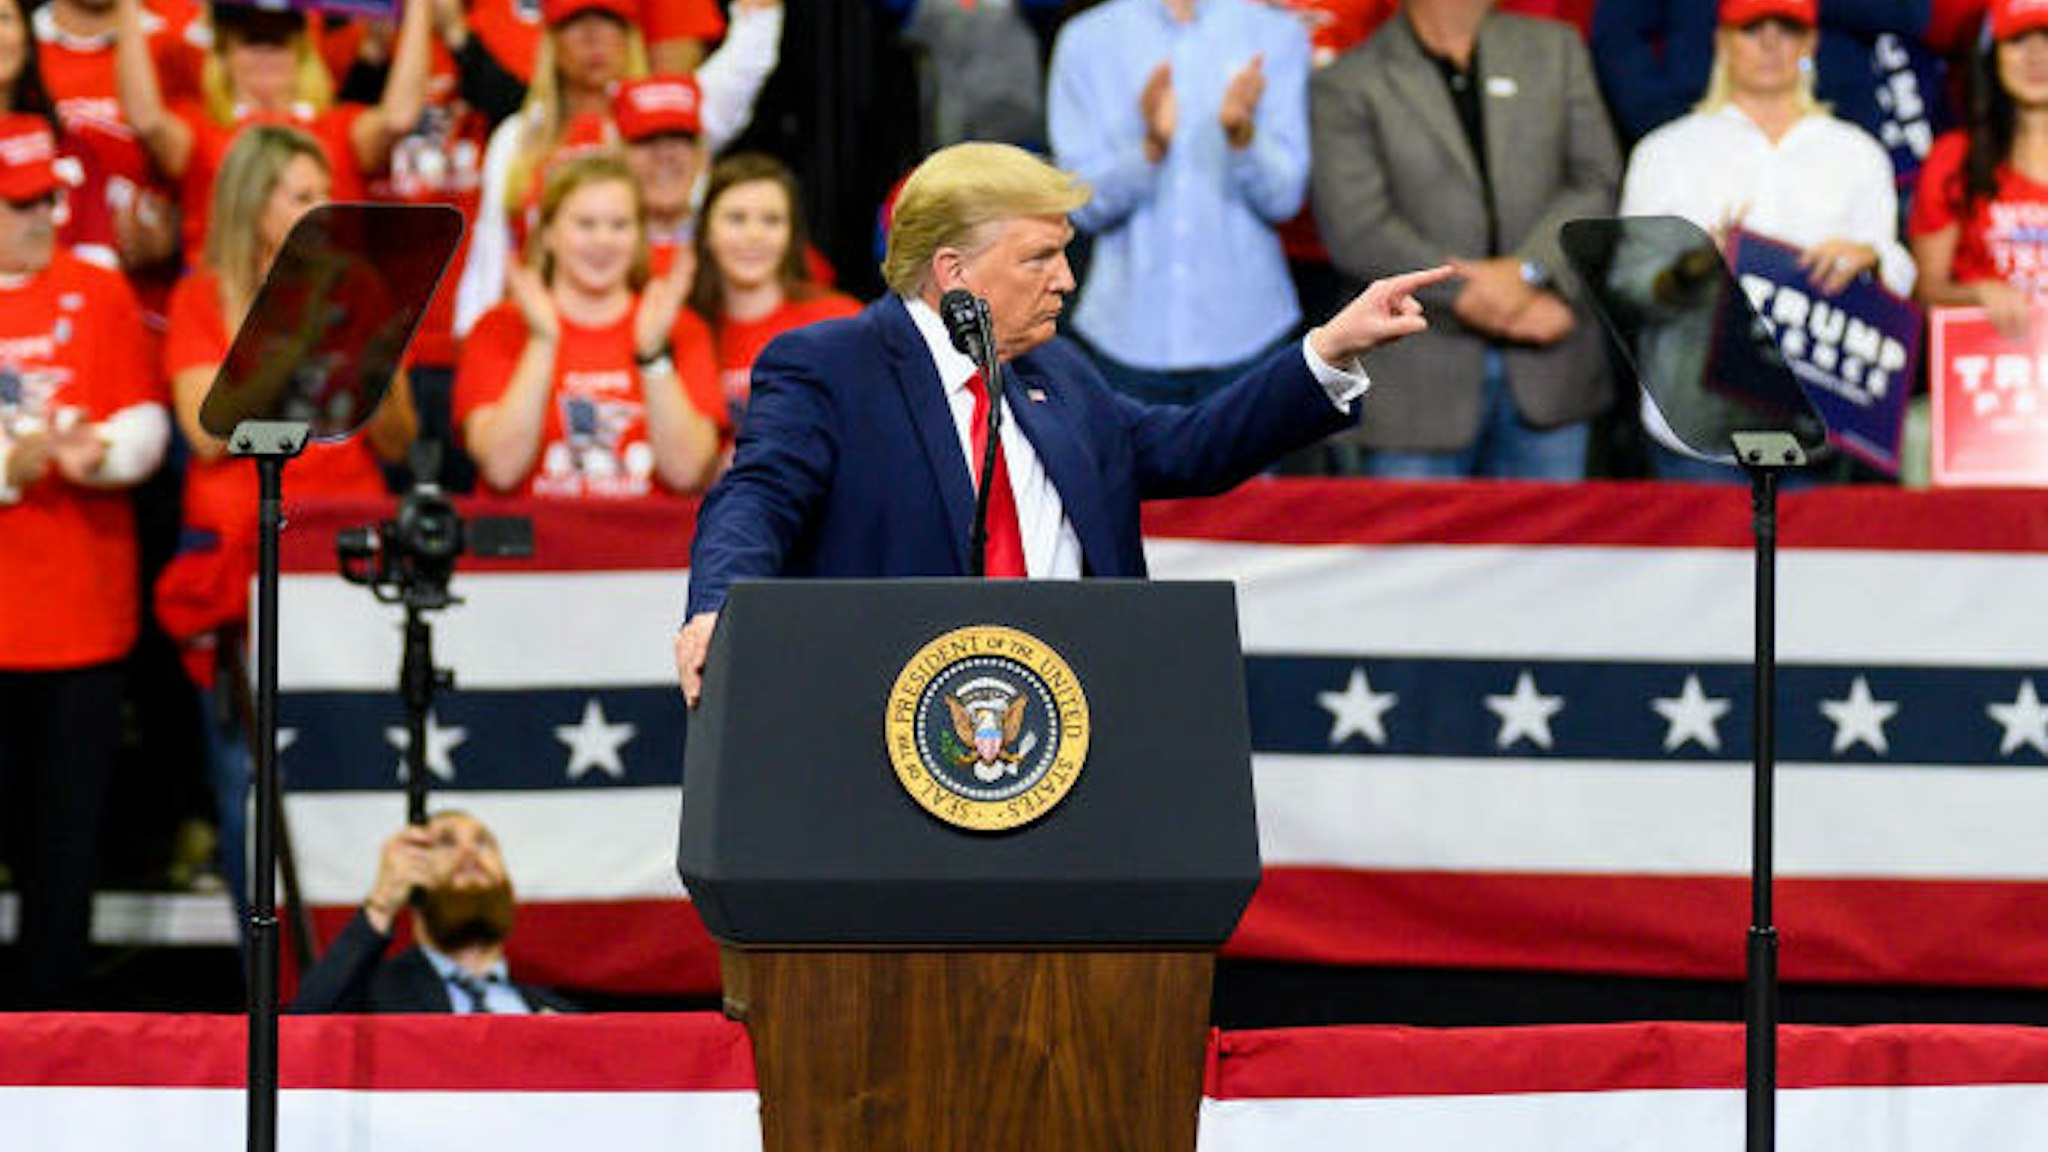 U.S. President Donald Trump speaks on stage during a campaign rally at the Target Center on October 10, 2019 in Minneapolis, Minnesota. The rally follows a week of a contentious back and forth between President Trump and Minneapolis Mayor Jacob Frey. (Photo by Stephen Maturen/Getty Images)